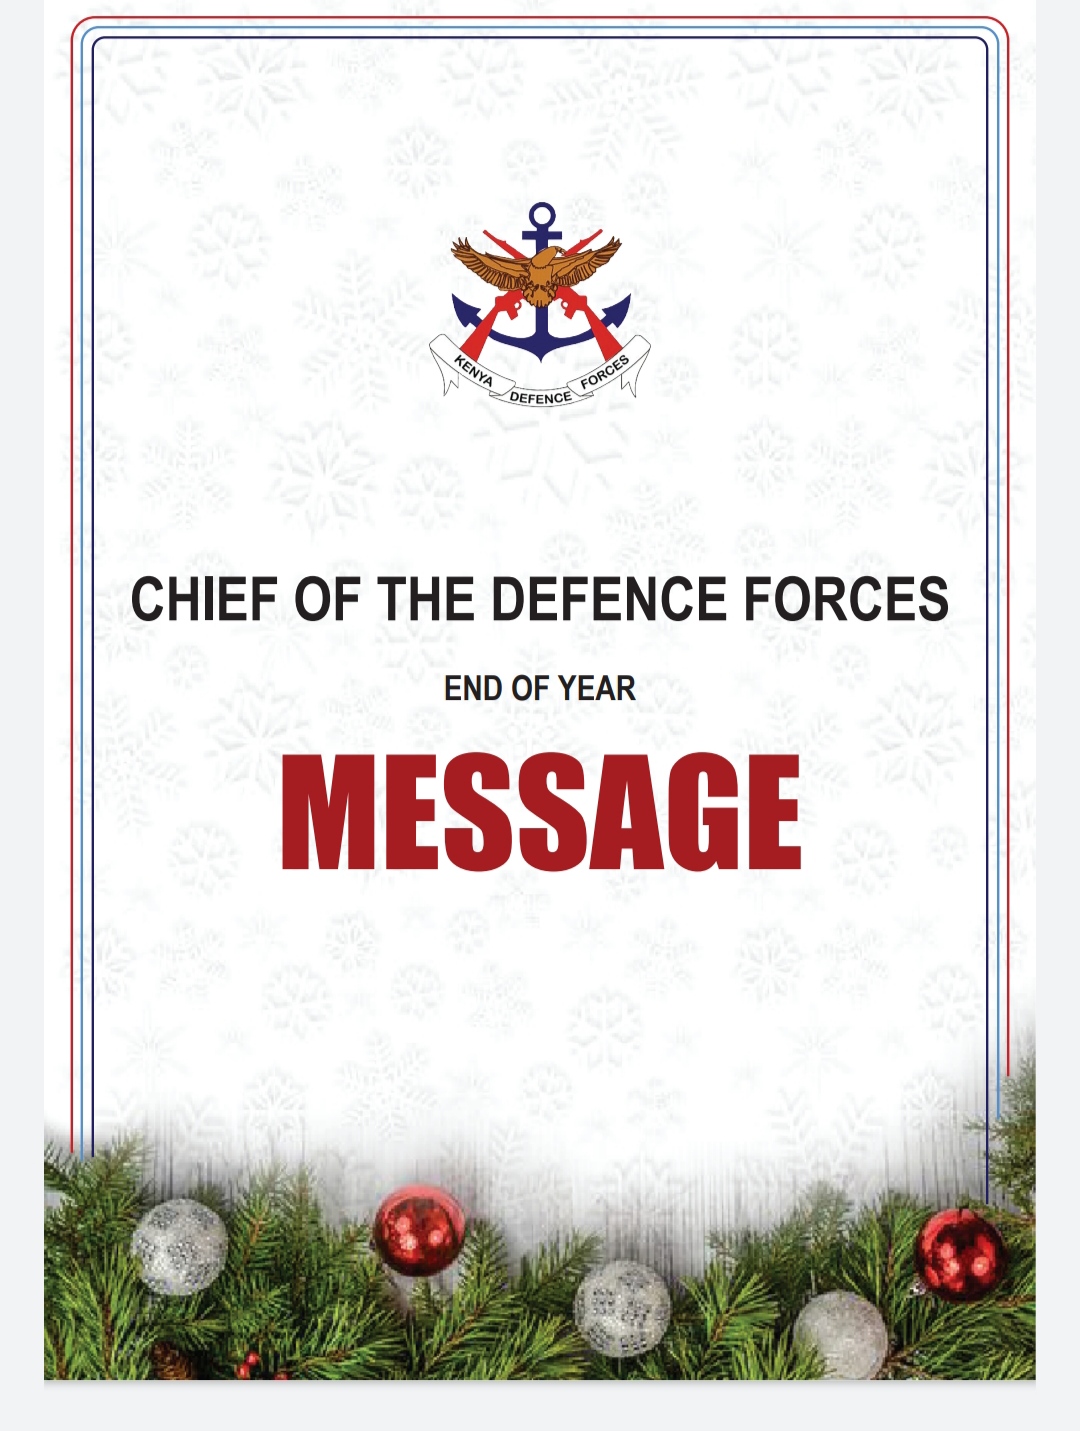 CHIEF OF THE DEFENCE FORCES END OF YEAR MESSAGE